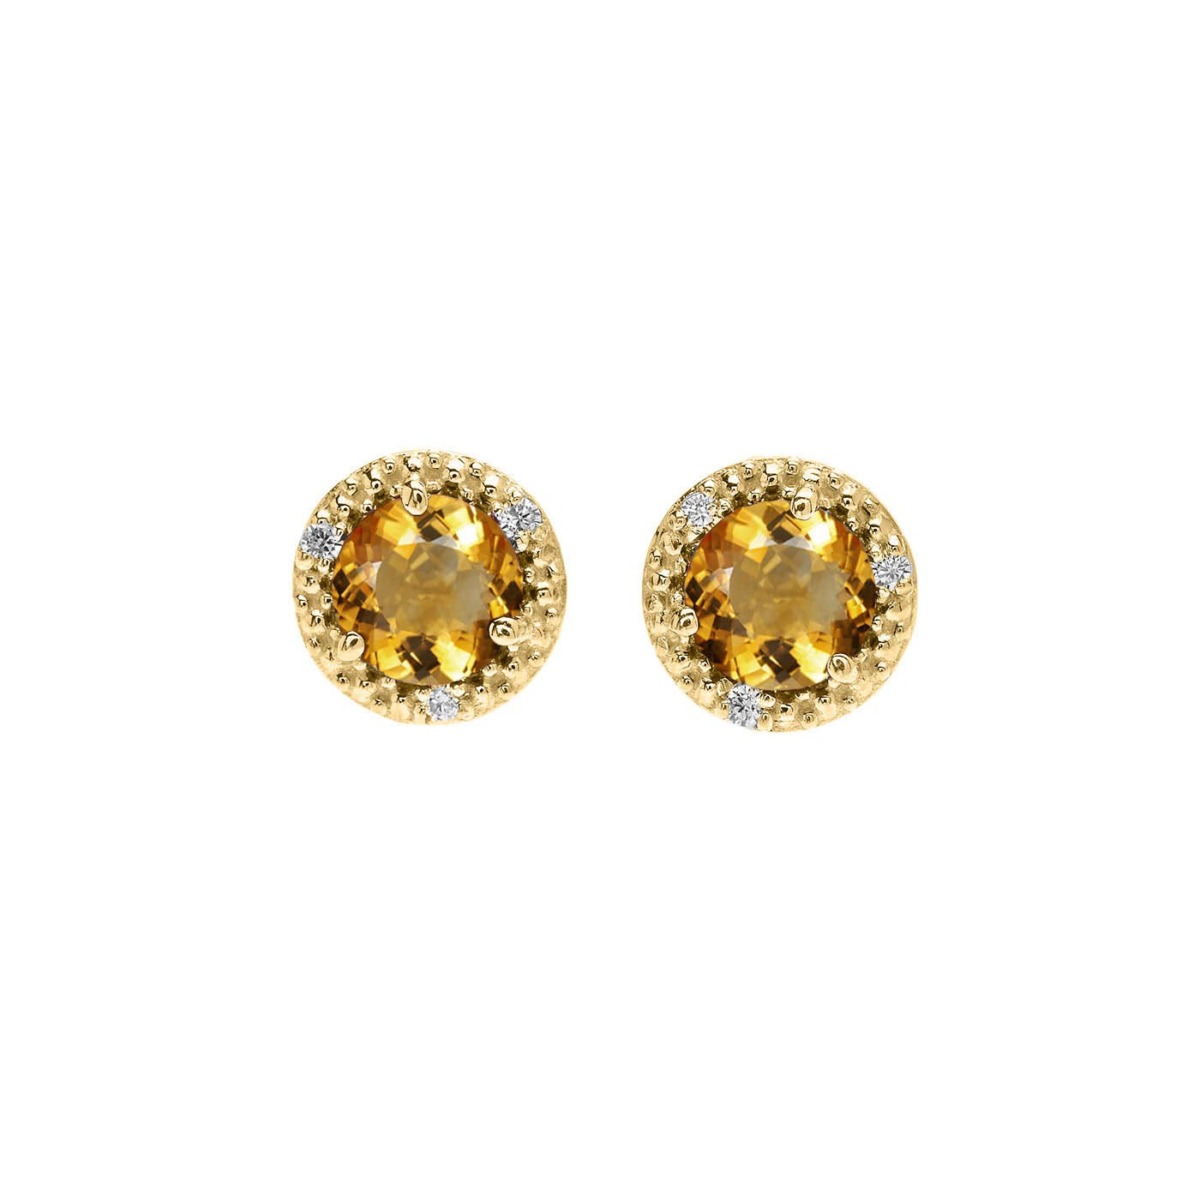 Gold Boutique - Mens Earrings in Gold GOOFASH